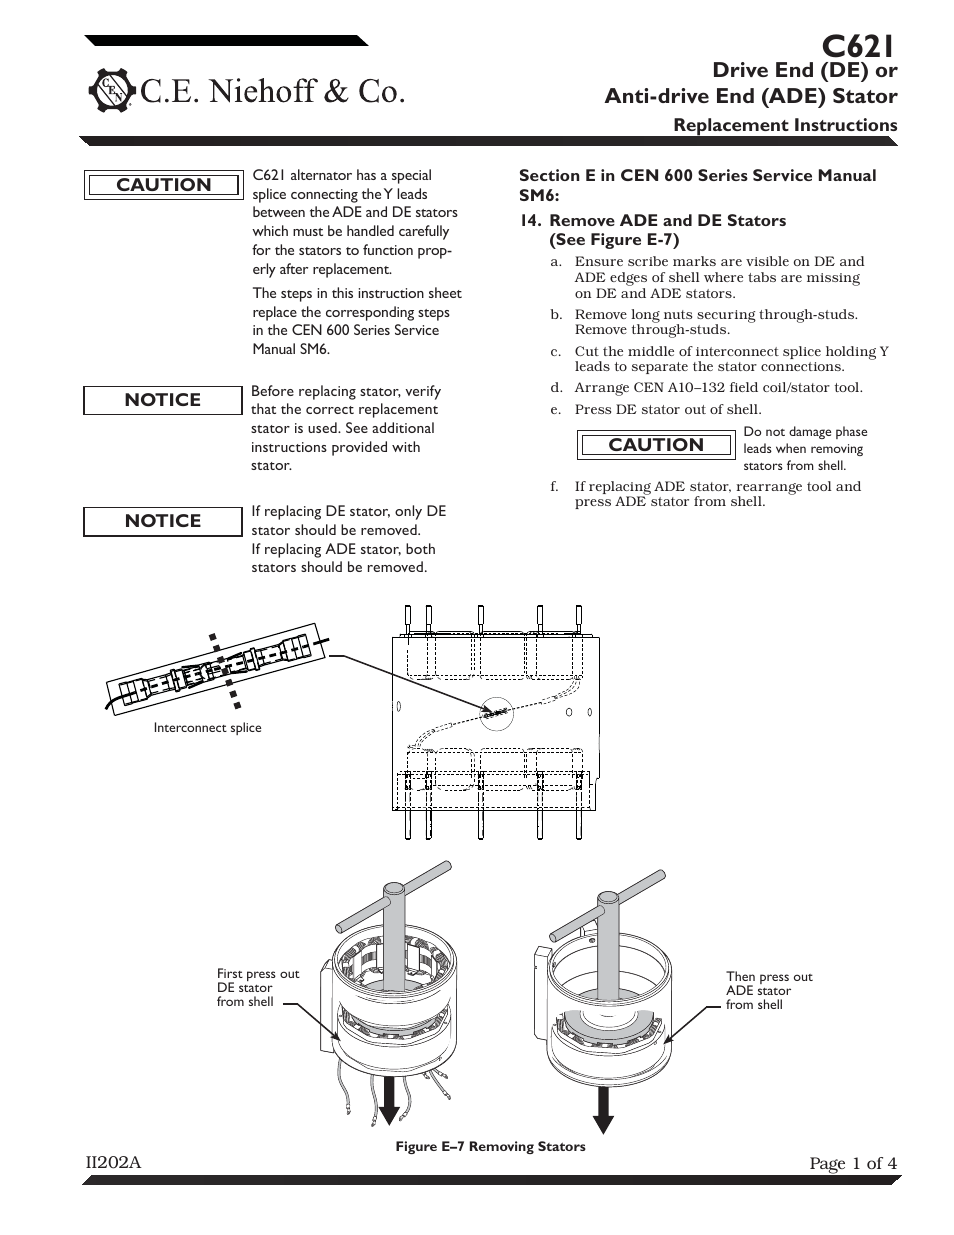 C621 Stator Replacement Instructions